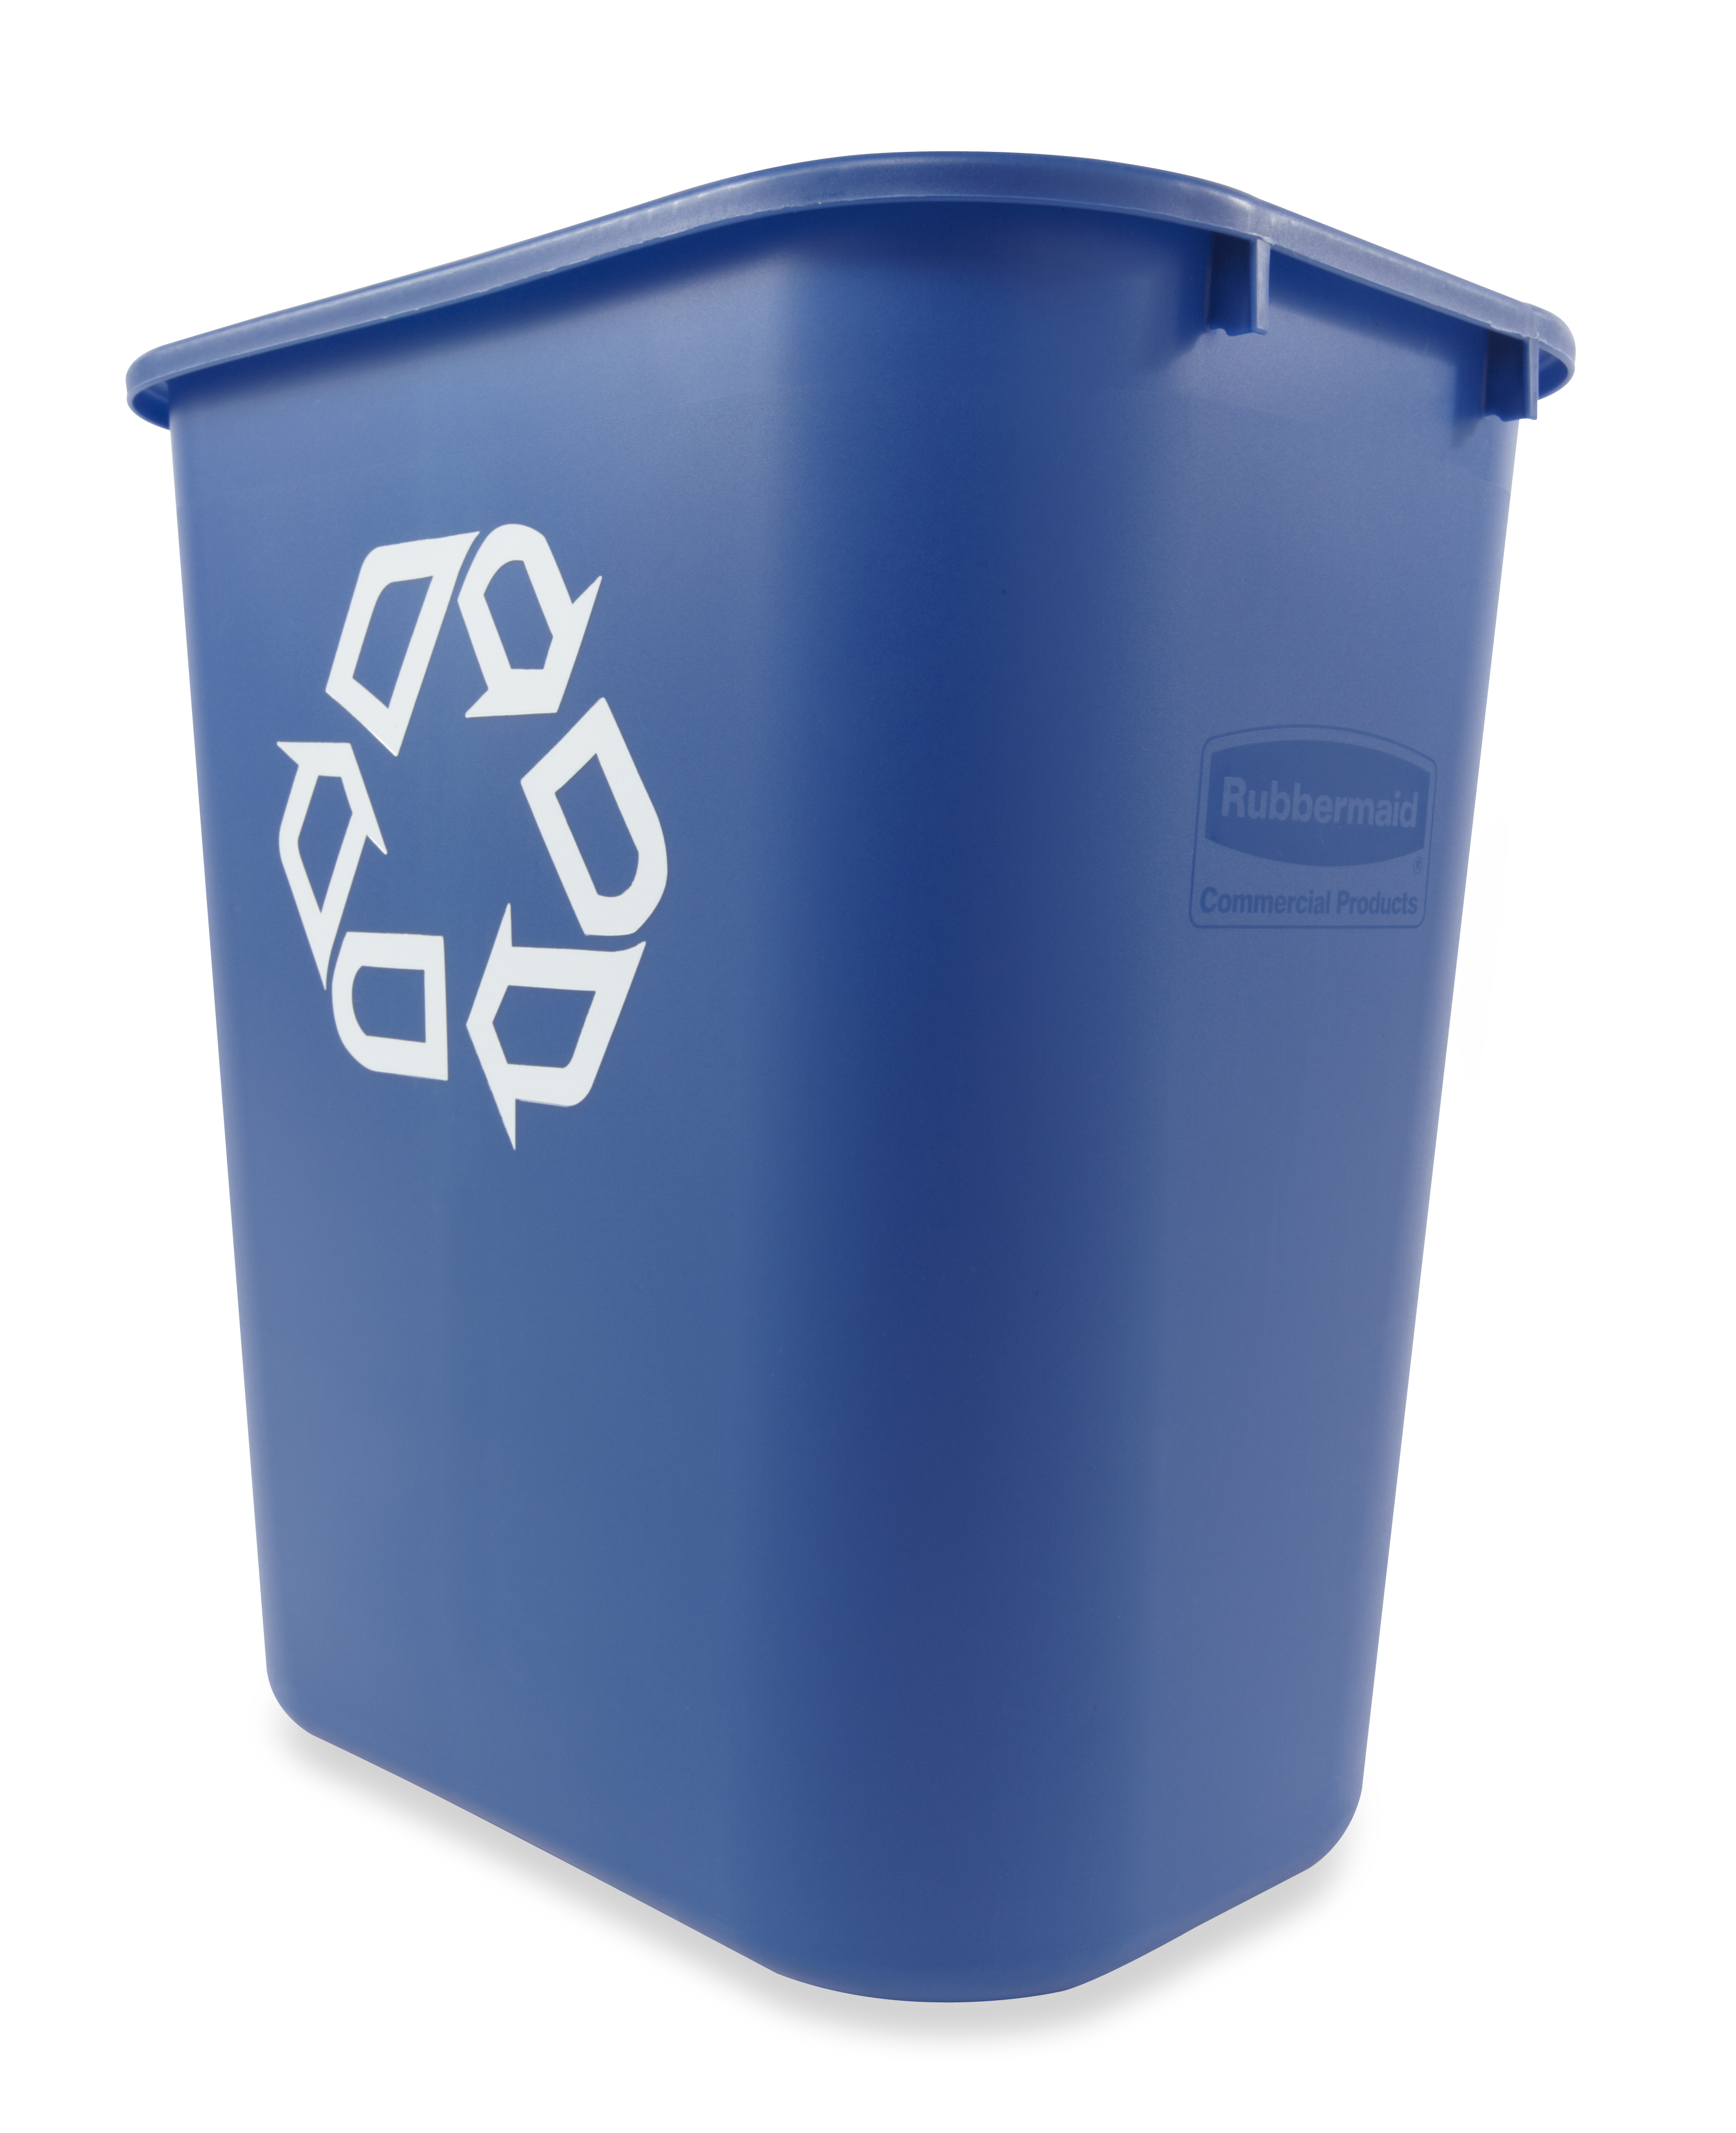 28-1/8 qt Capacity 14.4 Length x 10.25 Width x 15 Height Rubbermaid Commercial FG295673 Blue Medium Deskside Recycling Container with Universal Recycle Symbol 